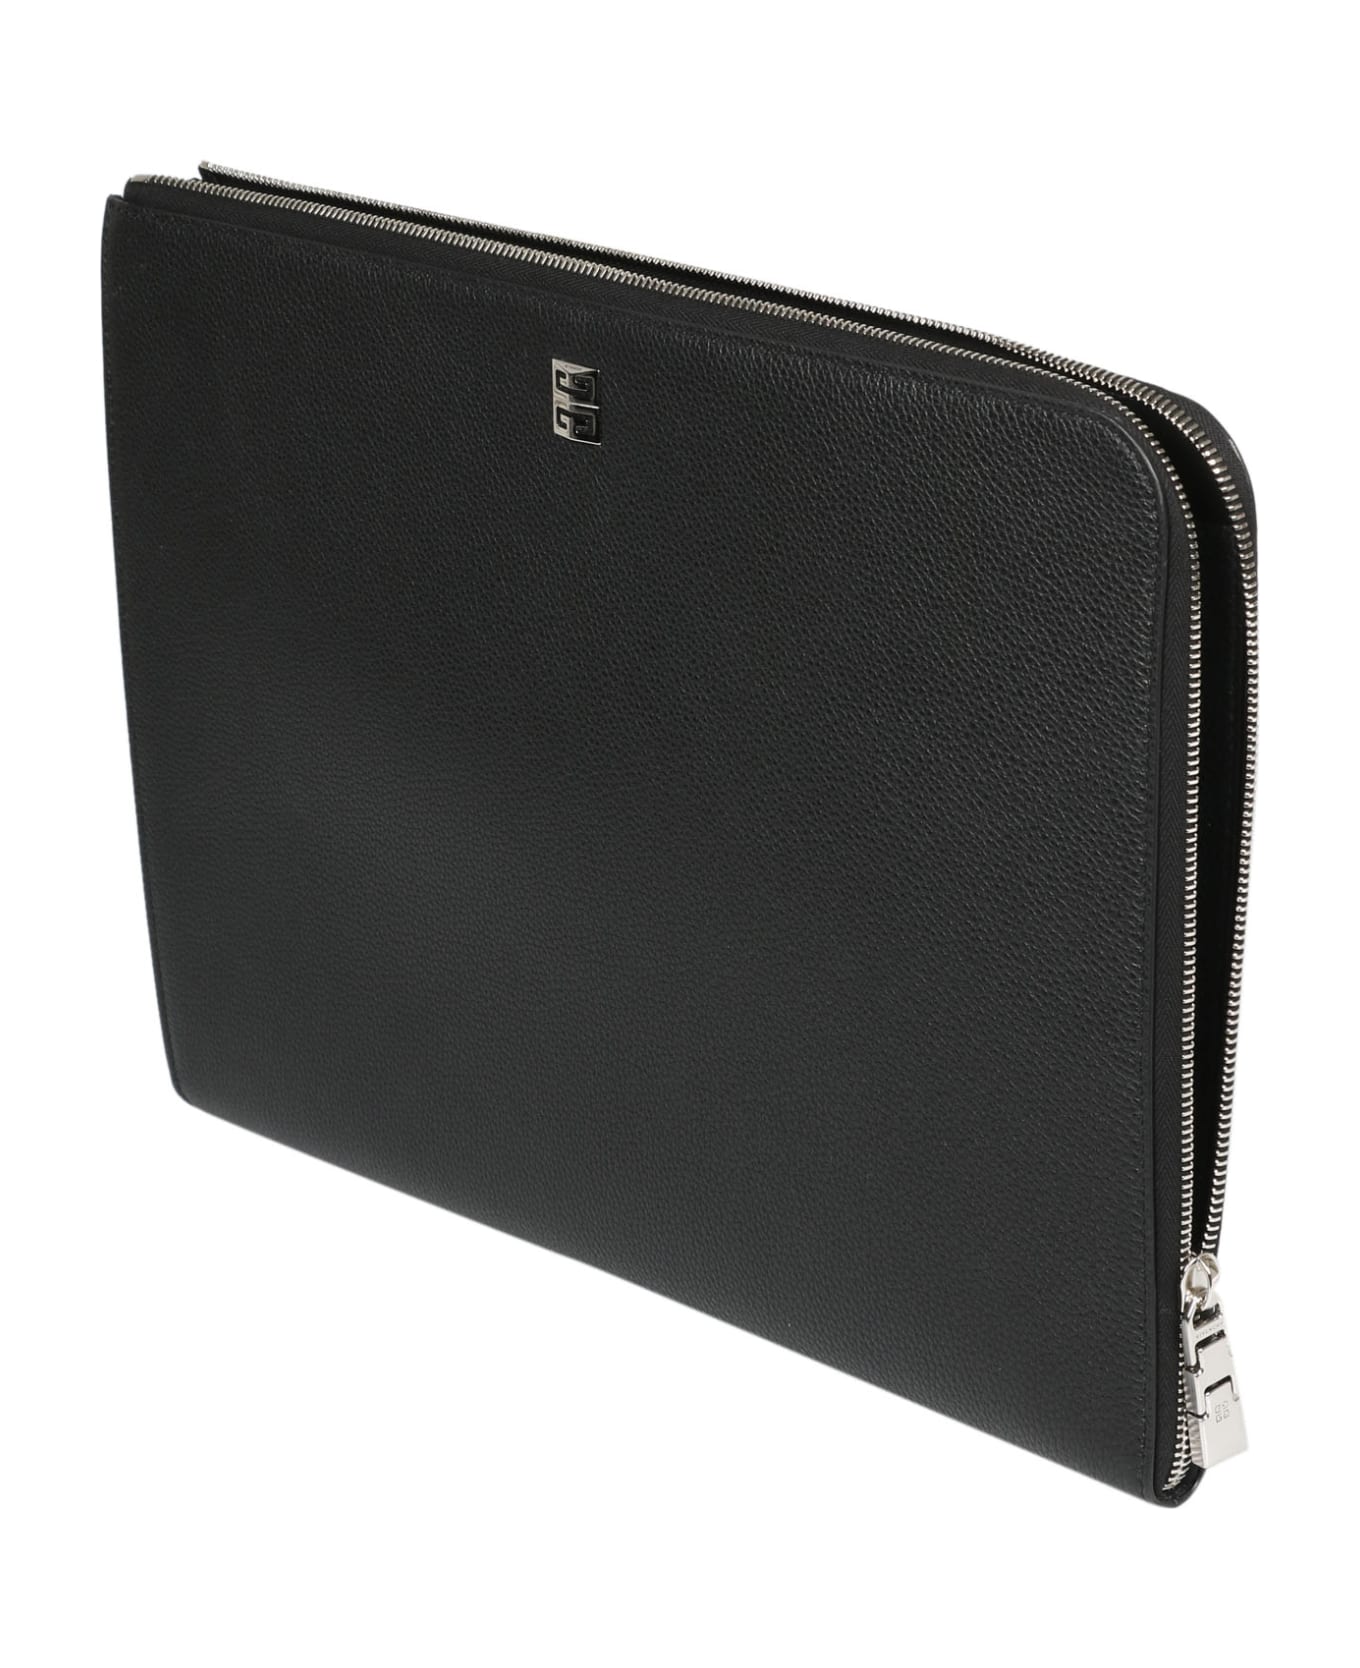 Givenchy Big Pouch Gusset - Black